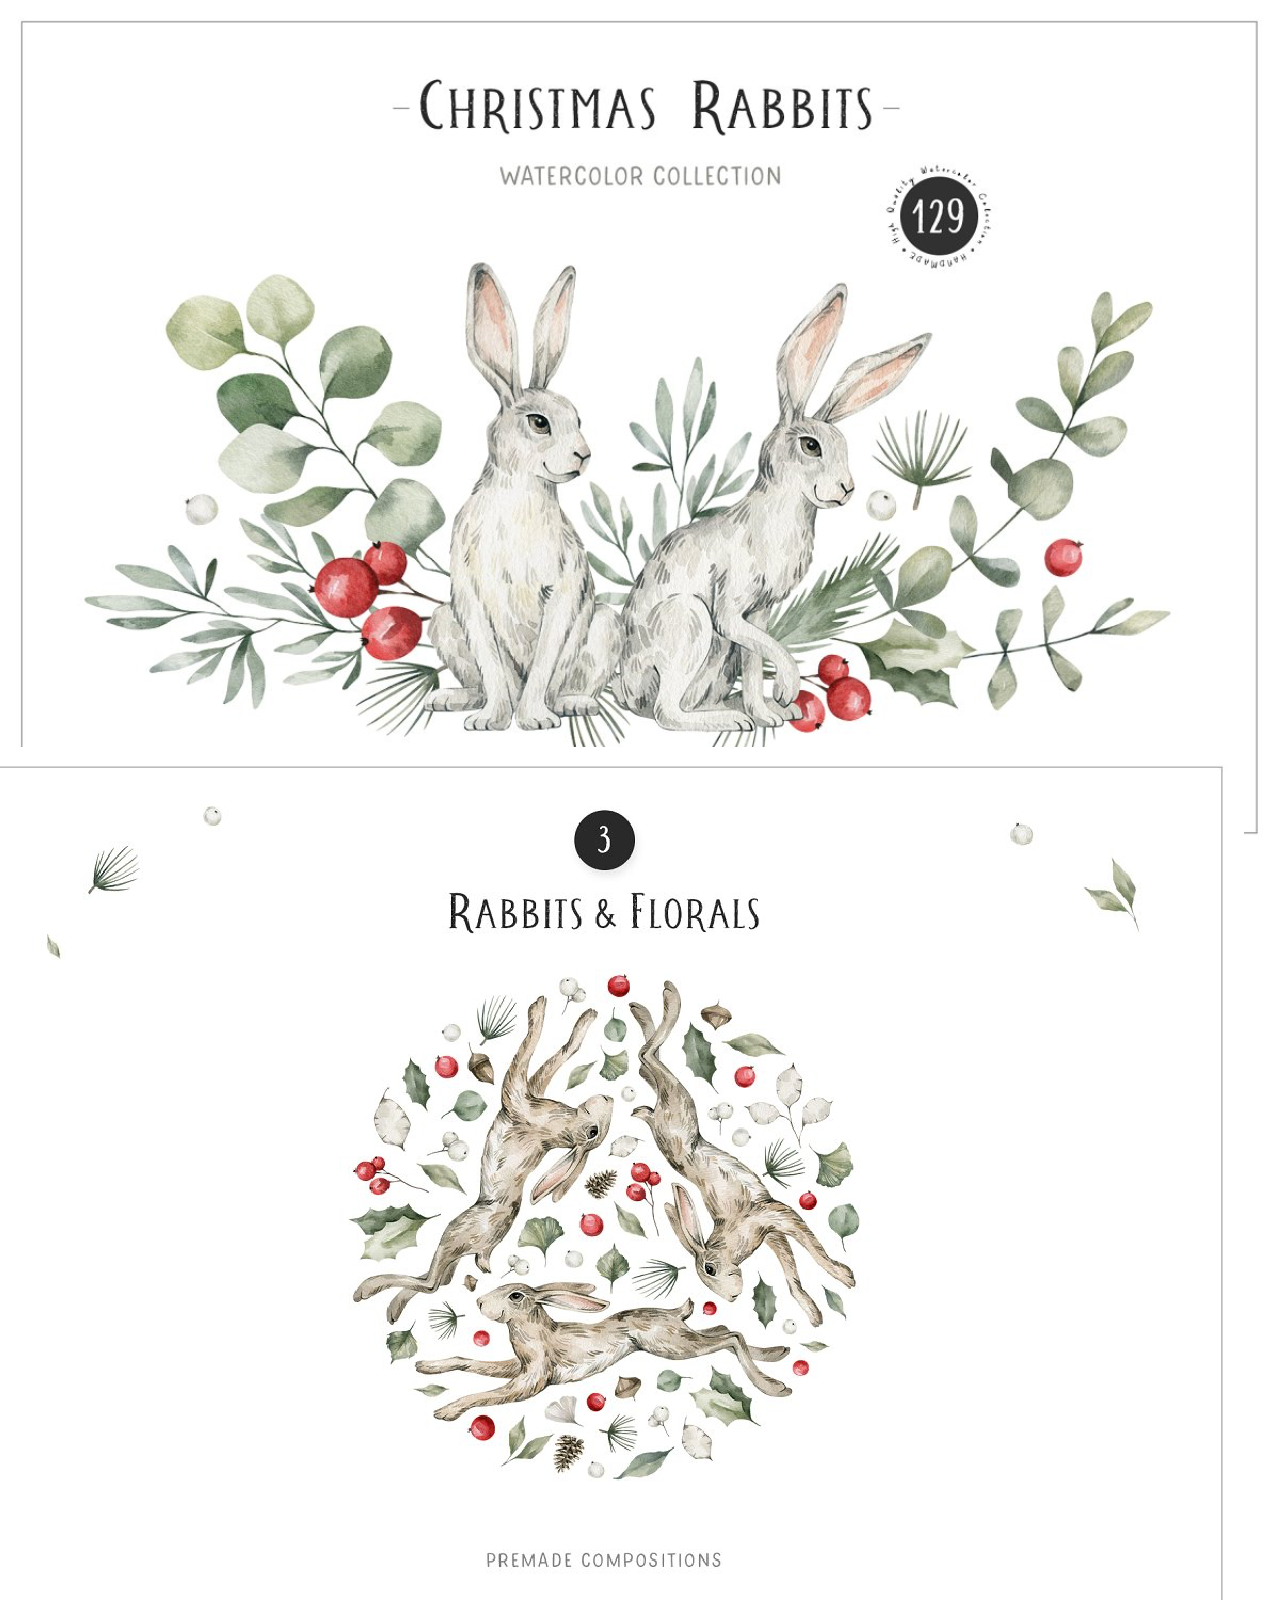 Christmas rabbits watercolor animals pinterest image preview.